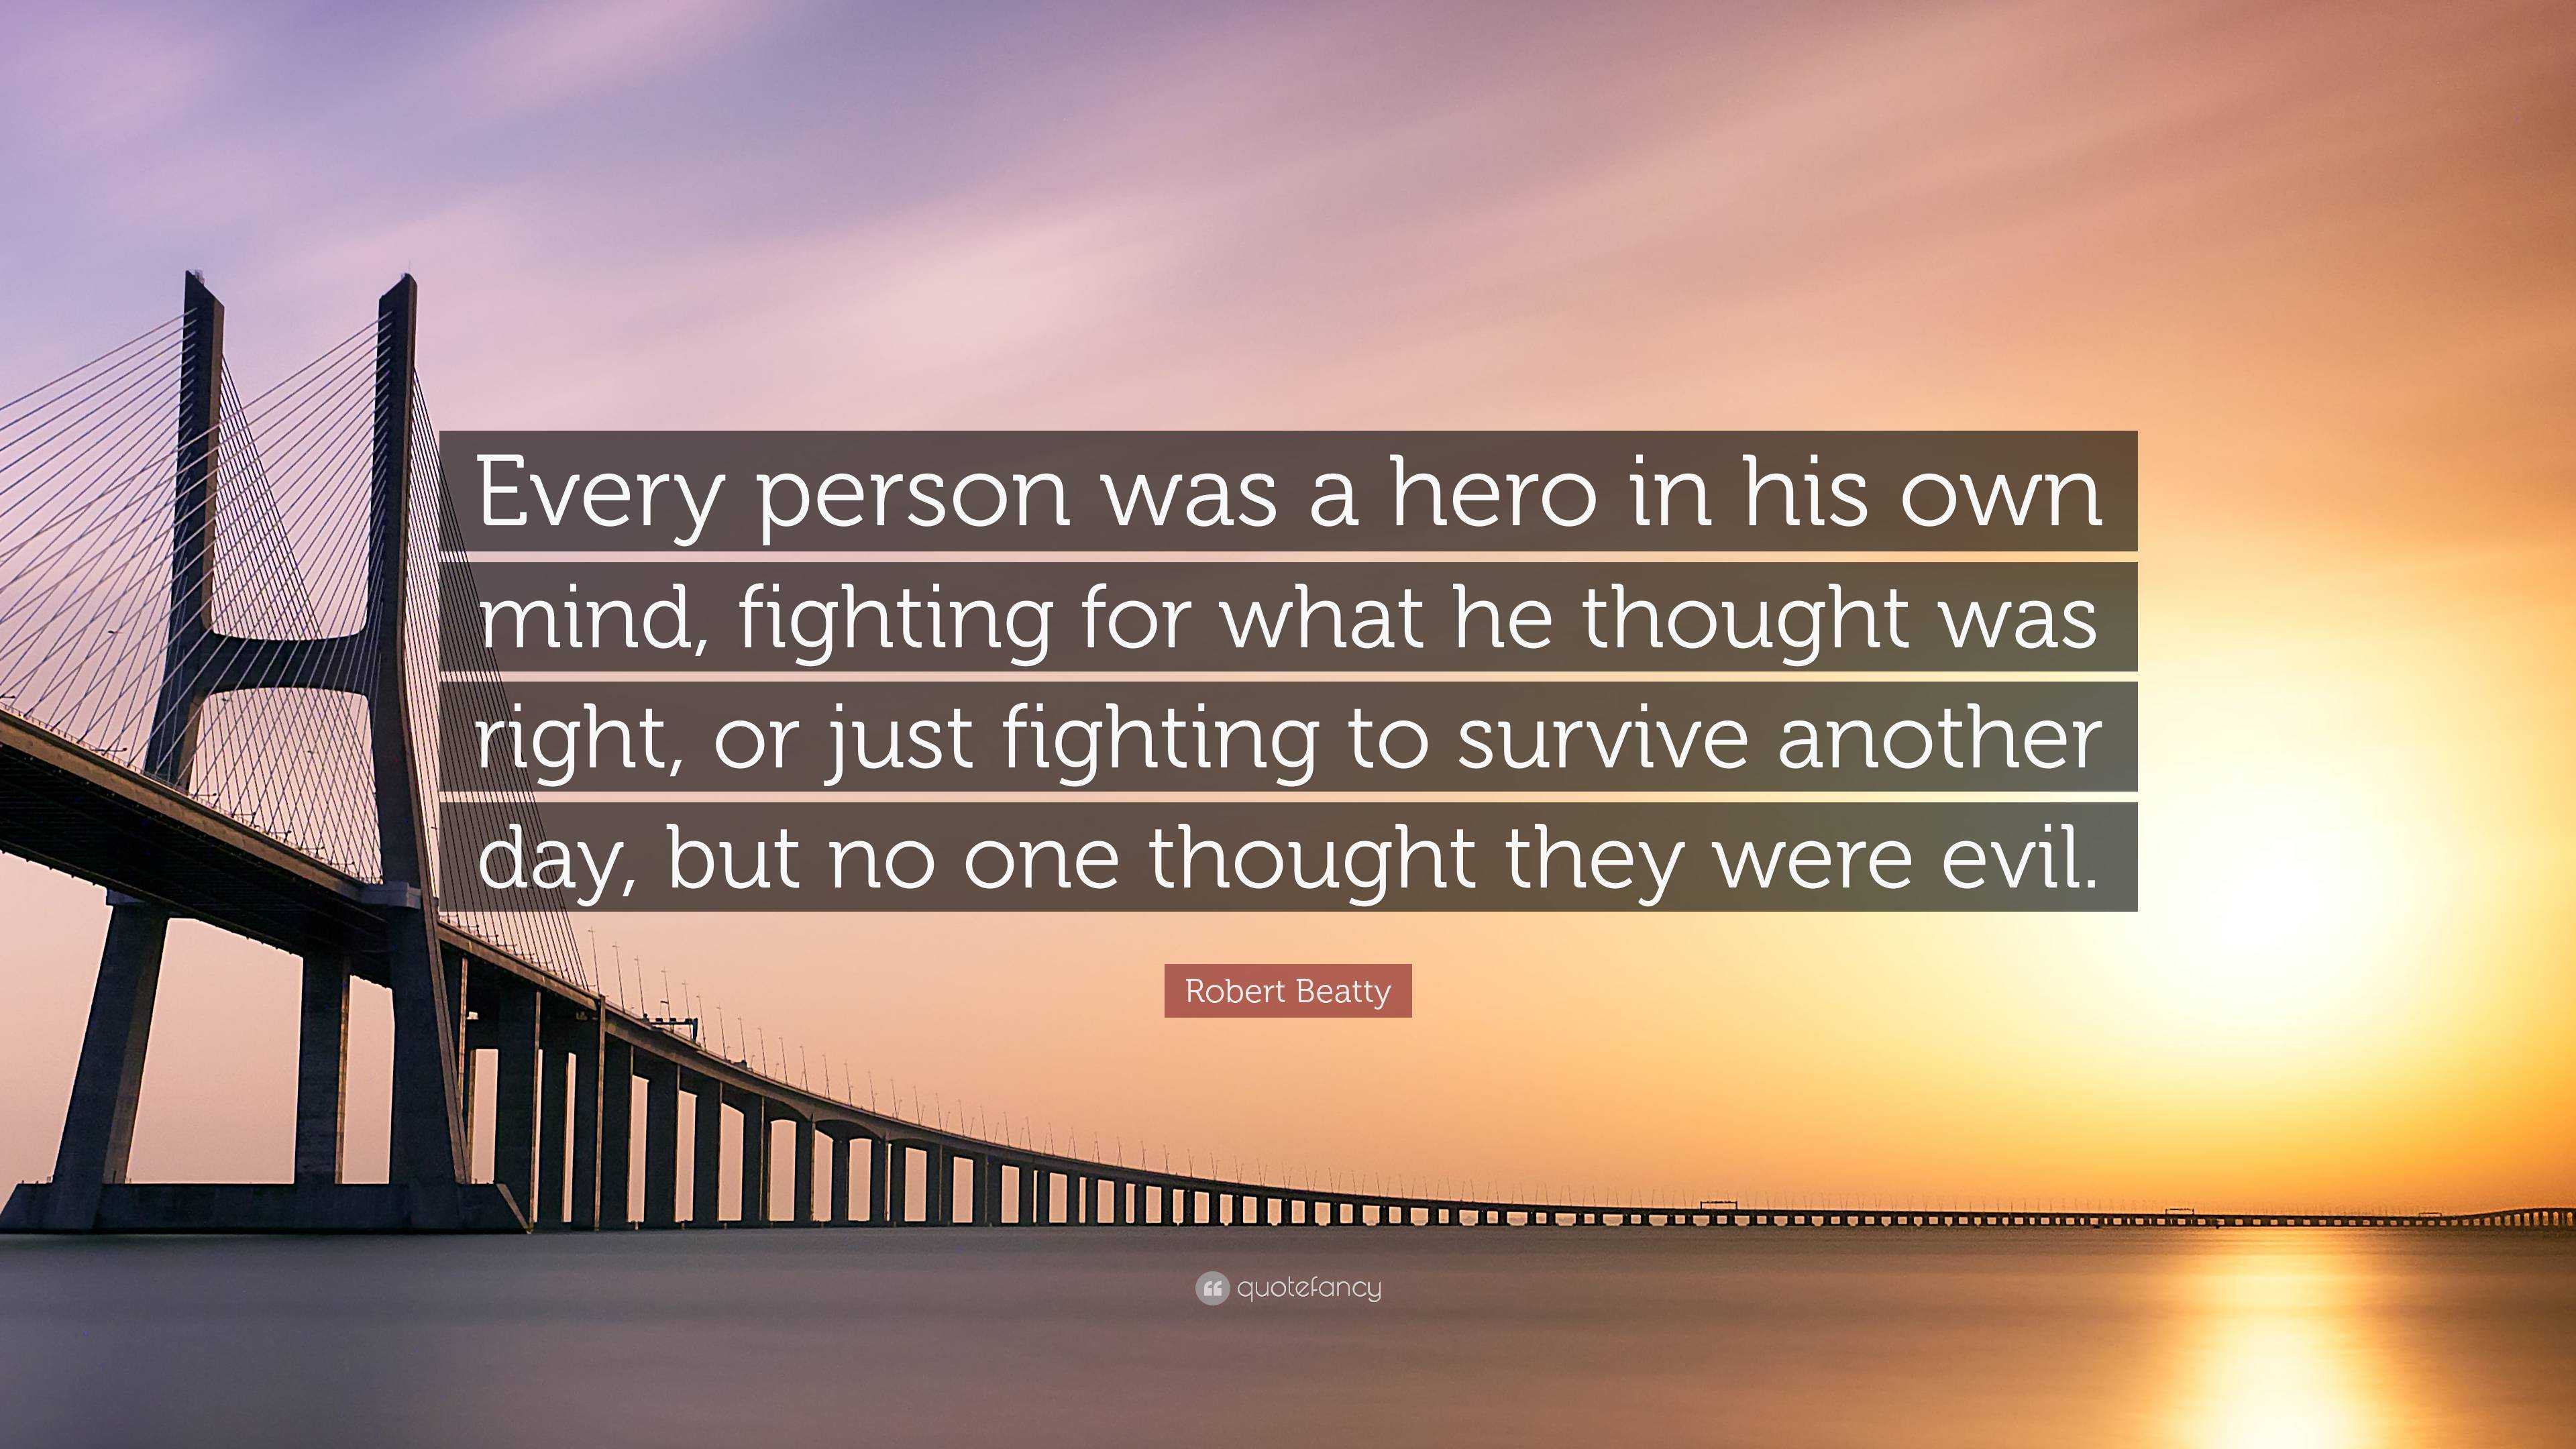 Robert Beatty Quote Every Person Was A Hero In His Own Mind Fighting For What He Thought Was Right Or Just Fighting To Survive Another Day